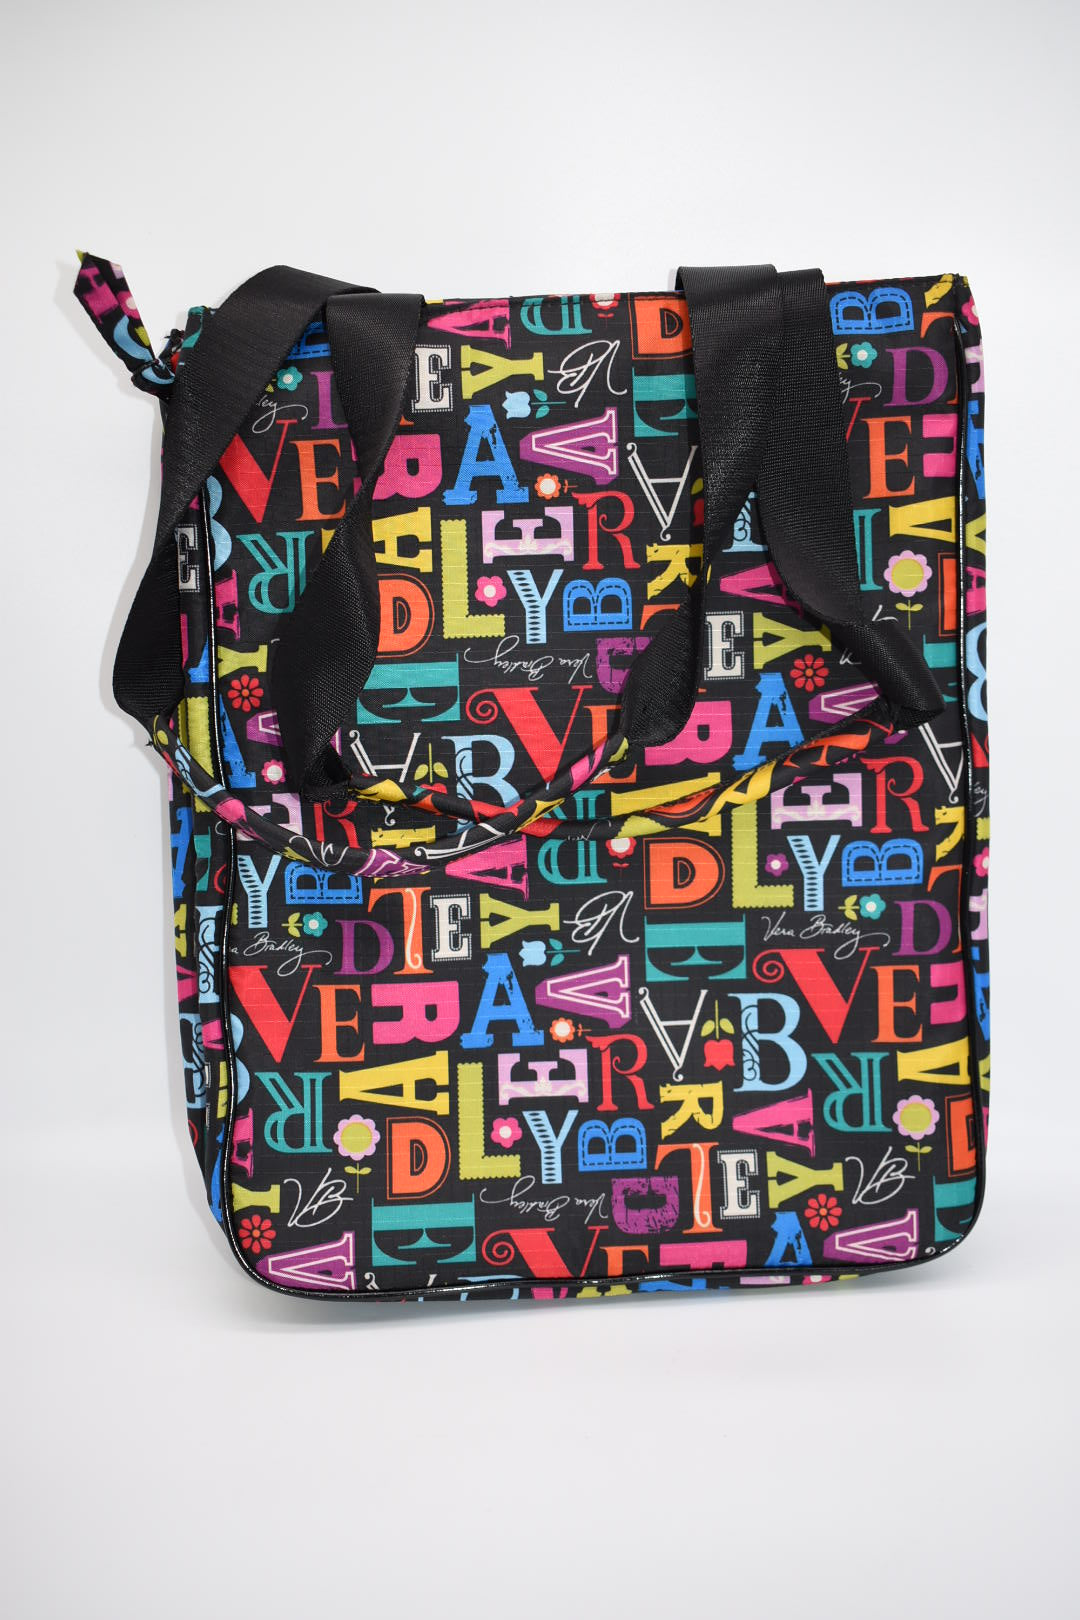 Vera Bradley Frill Laptop Travel Tote Bag in "From A to Vera" Pattern